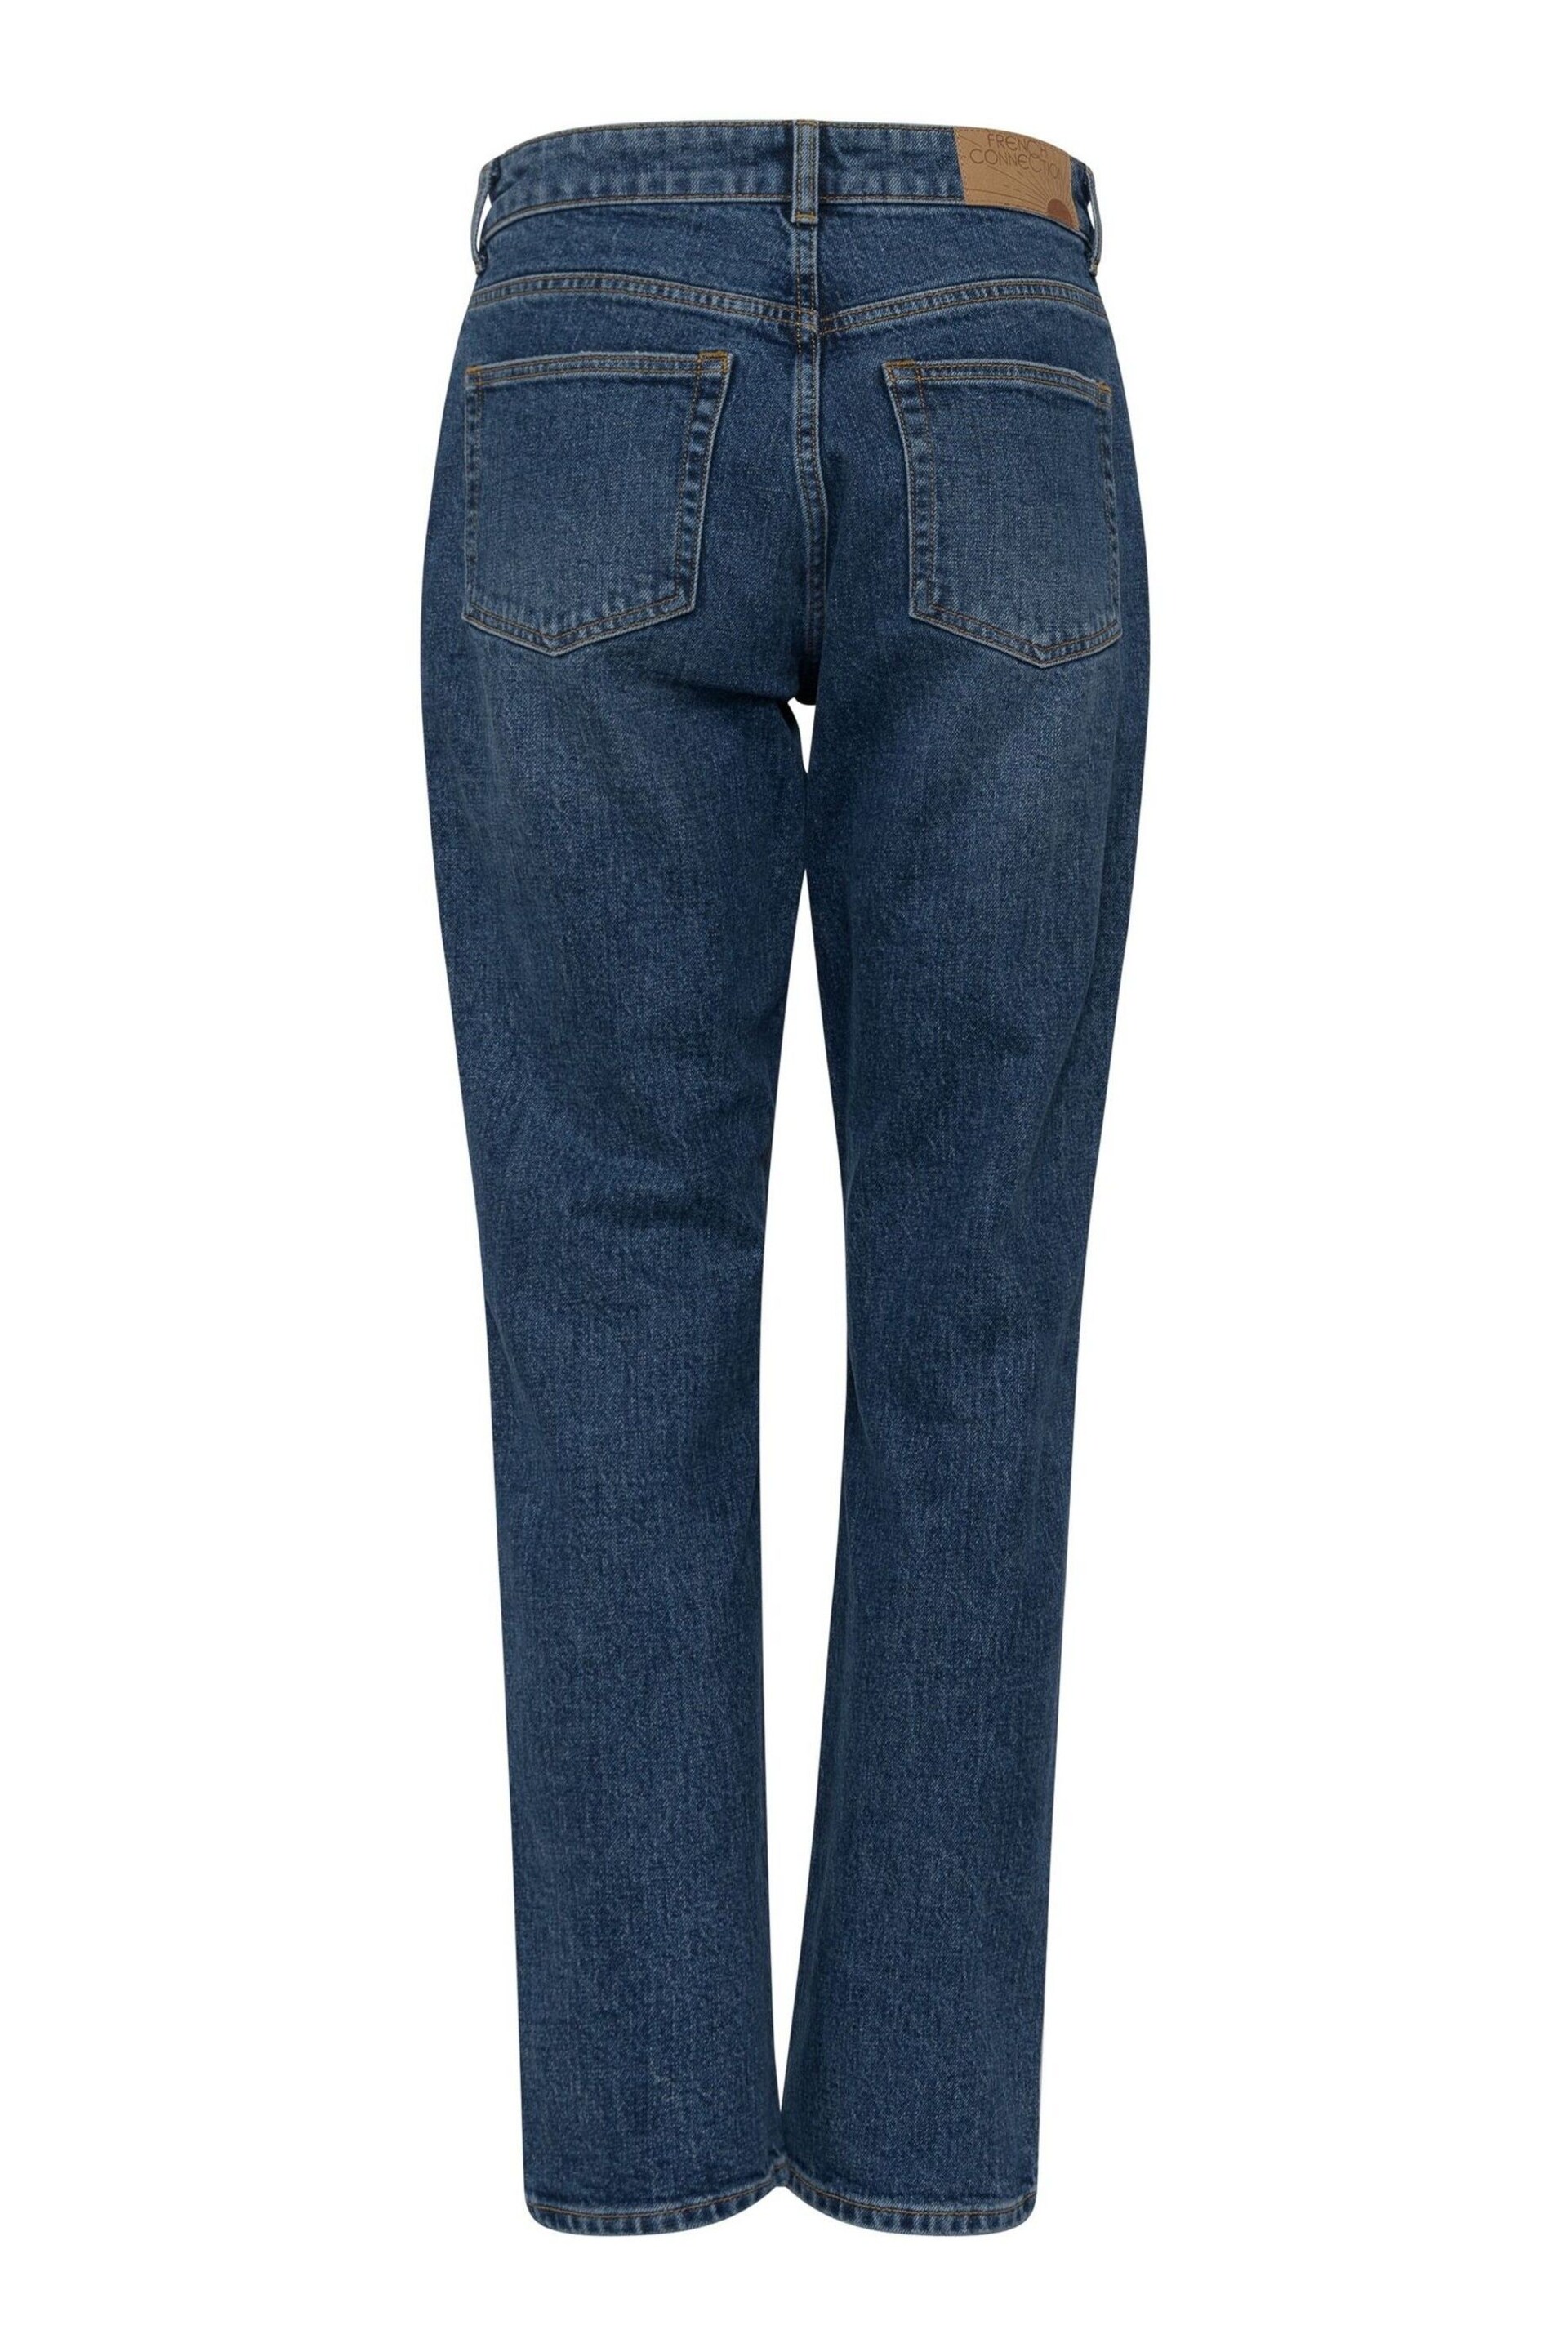 French Connection Comfort Stretch High Rise Straight Leg Jeans - Image 3 of 3